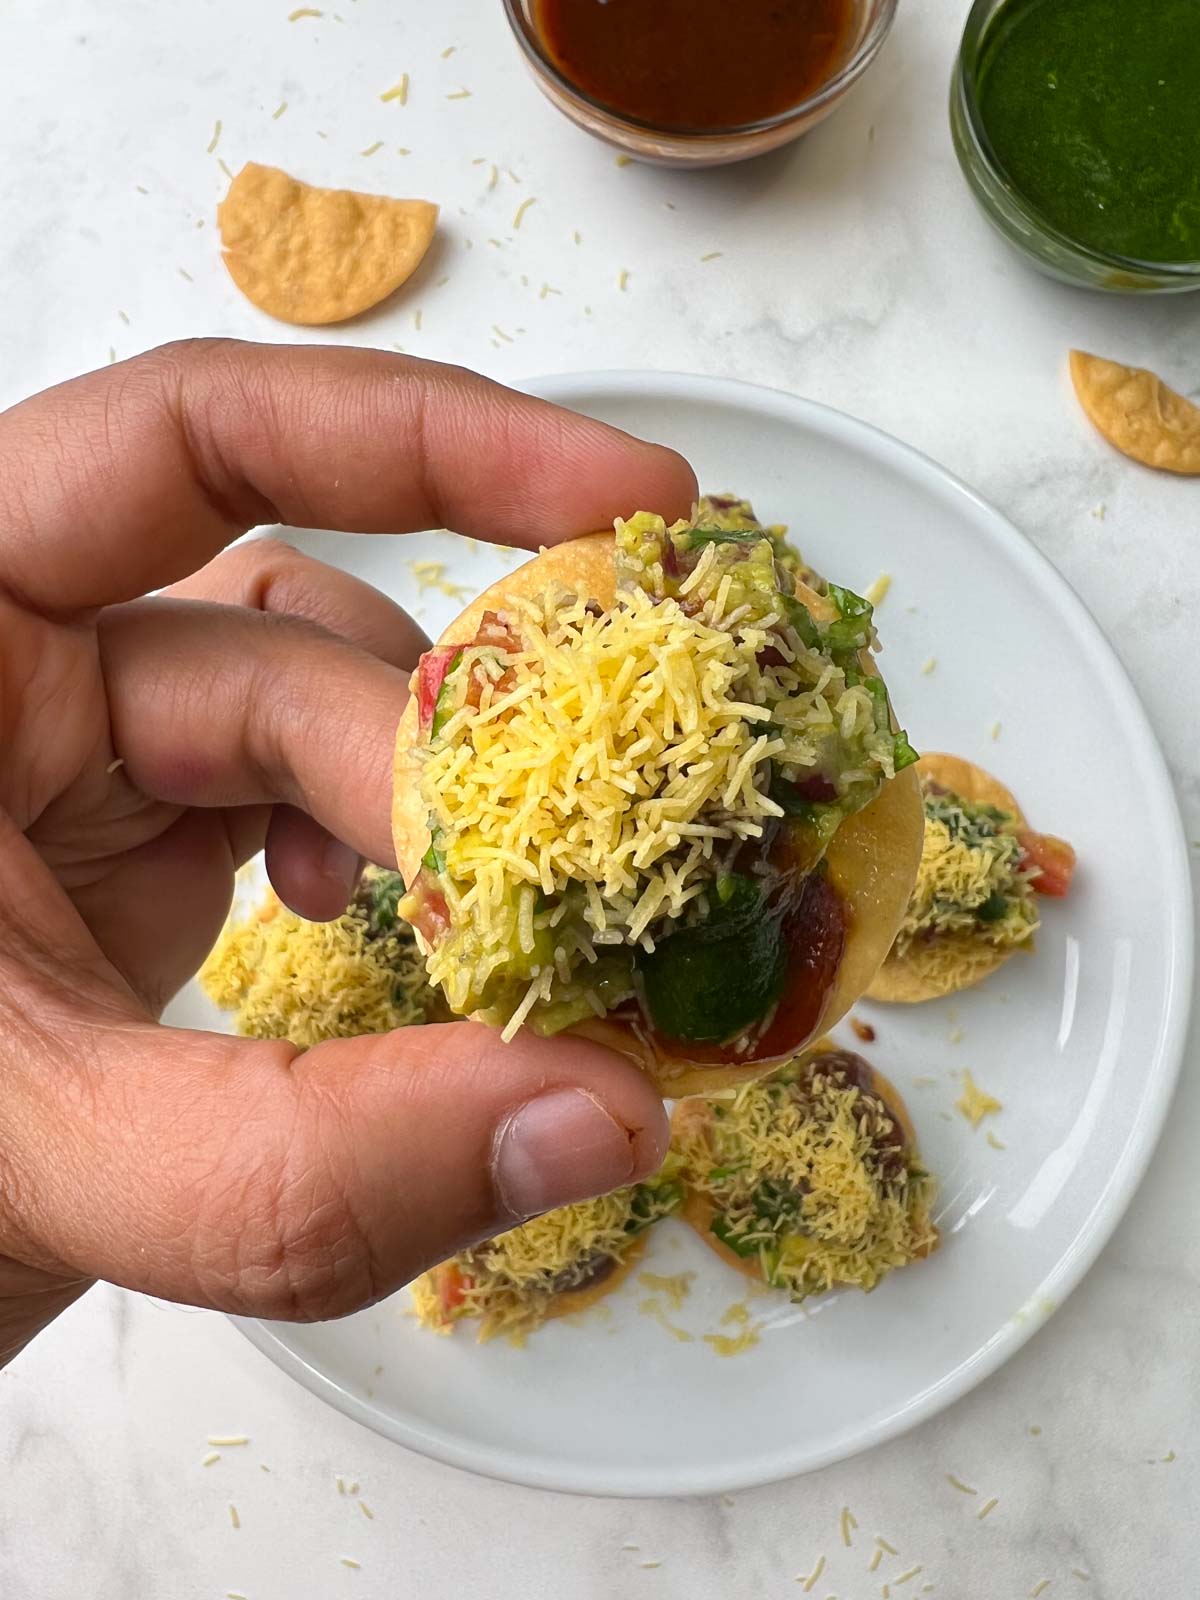 avocado papri chaat in a hand with chutneys on the side